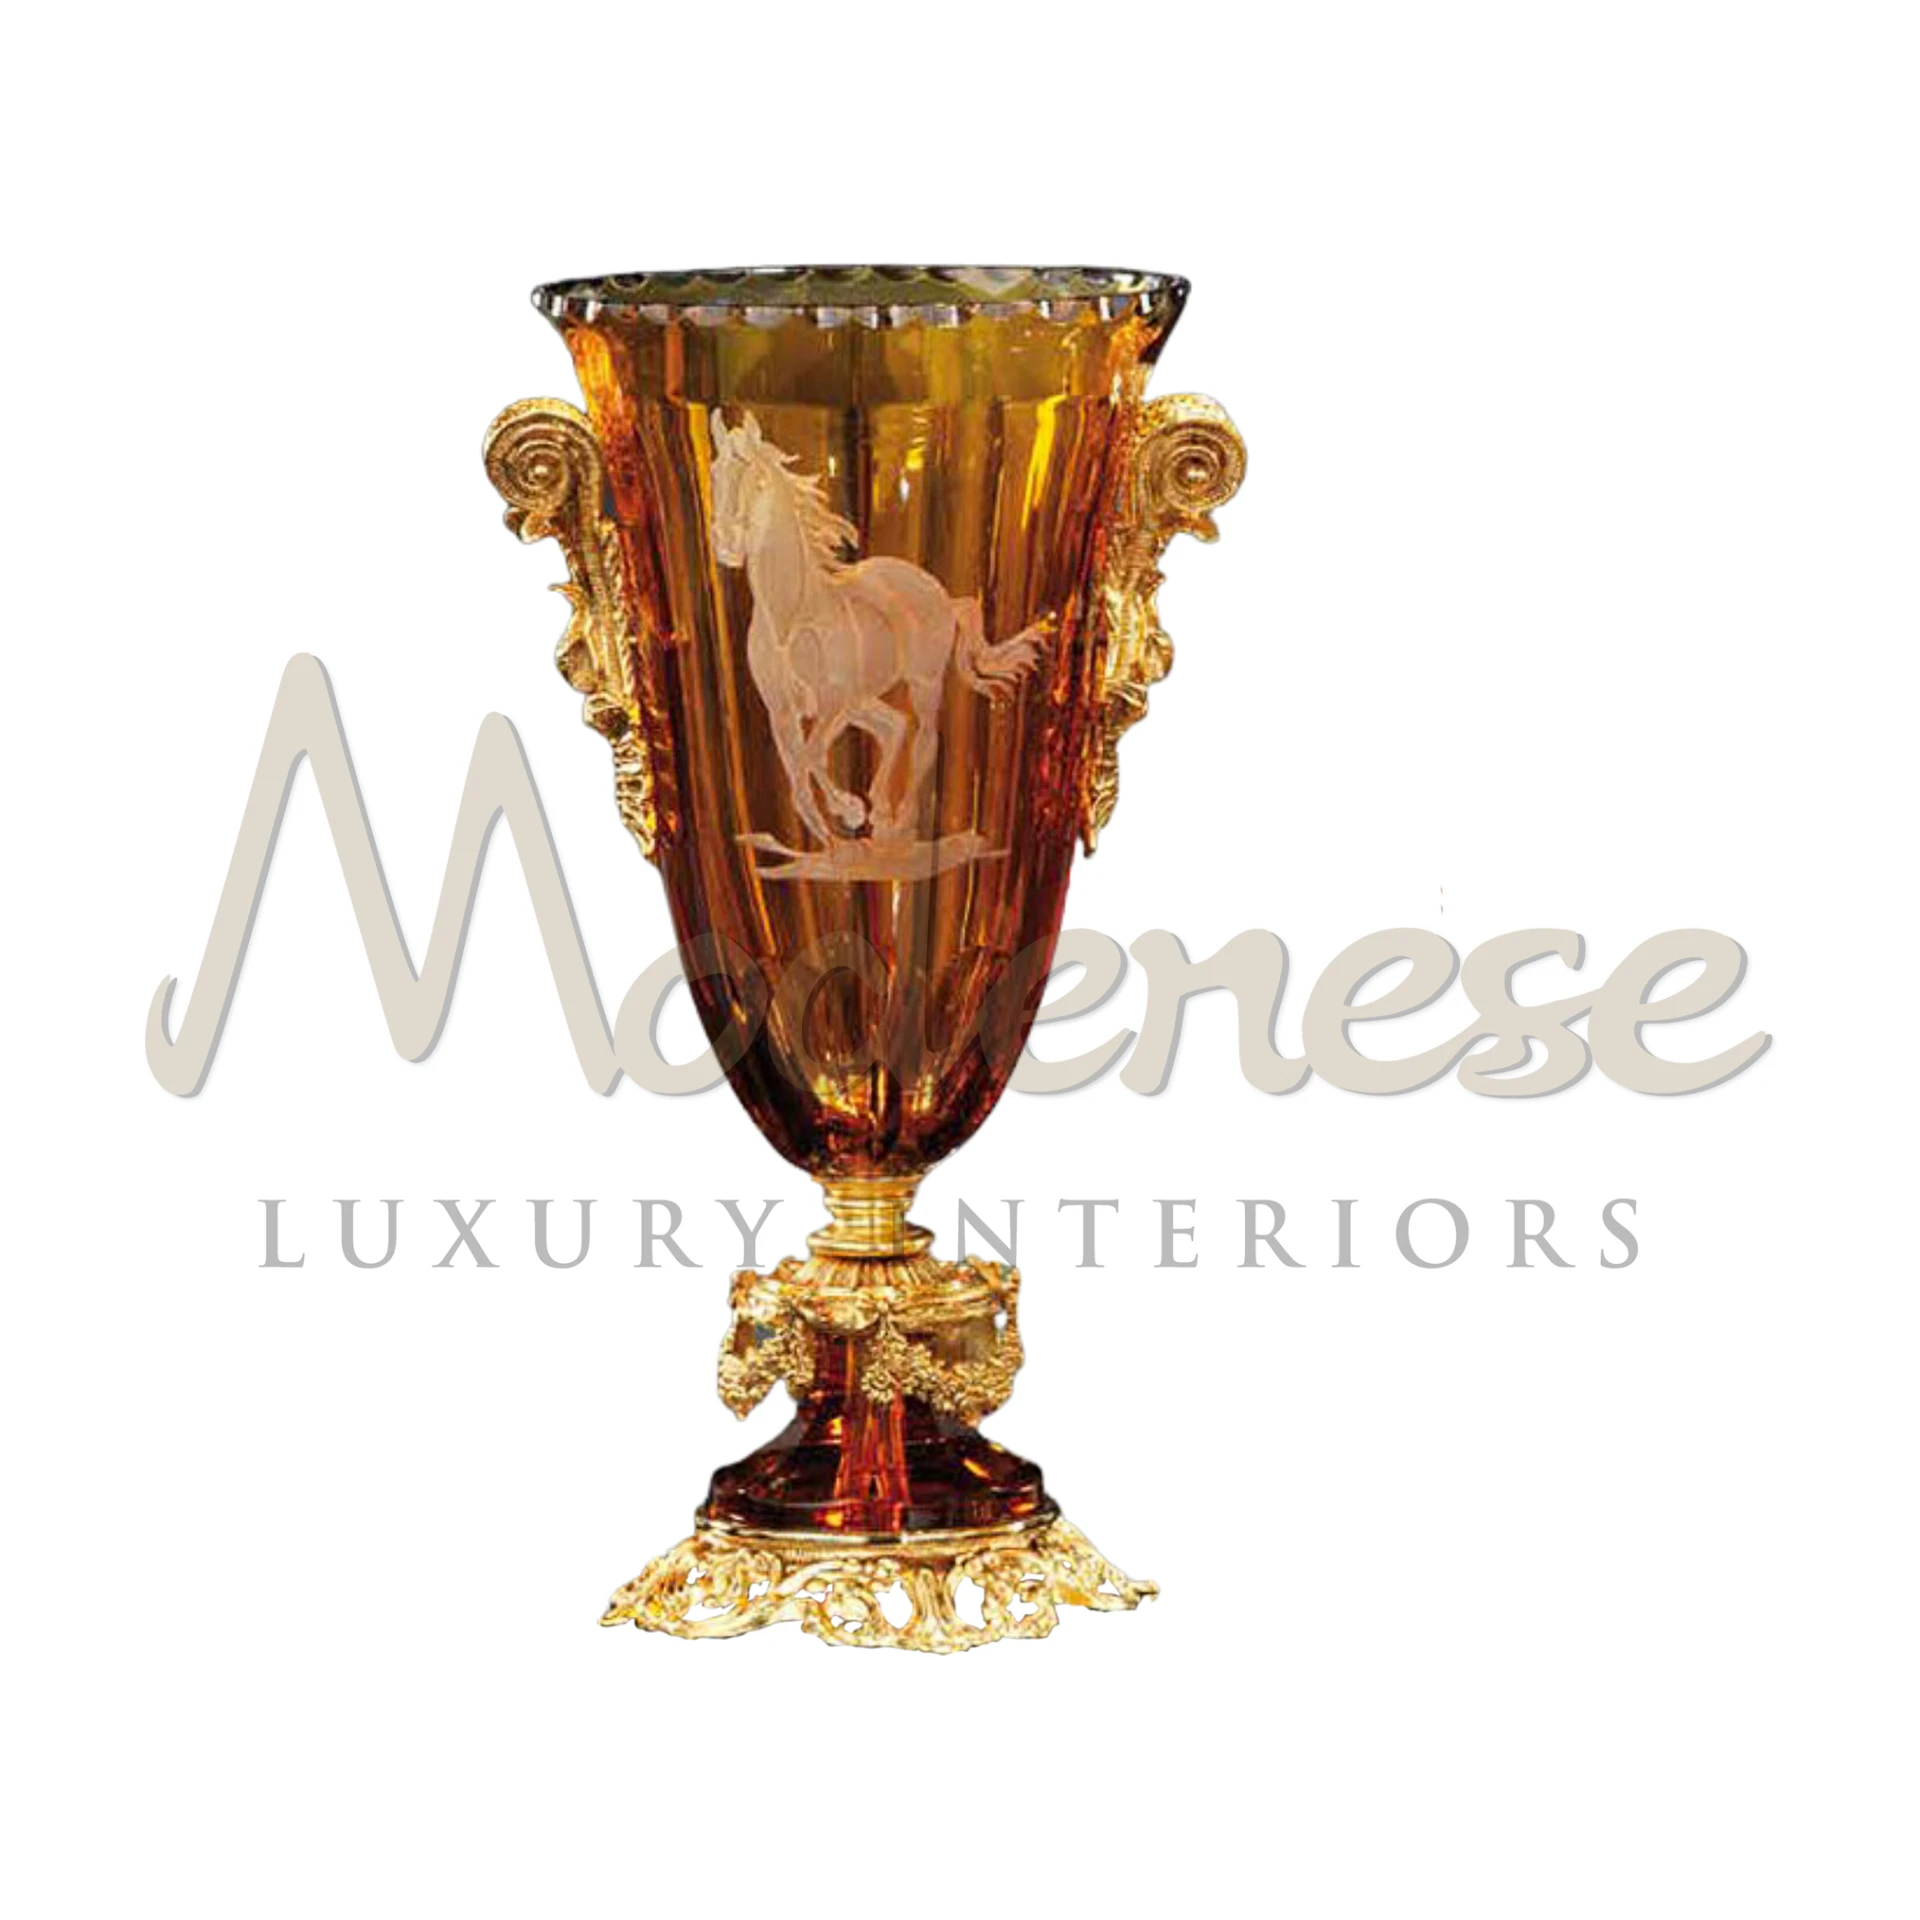 Elegant French-style crystal vase with intricate cut and etched designs, ideal for enhancing luxury, classic, and baroque interior spaces.